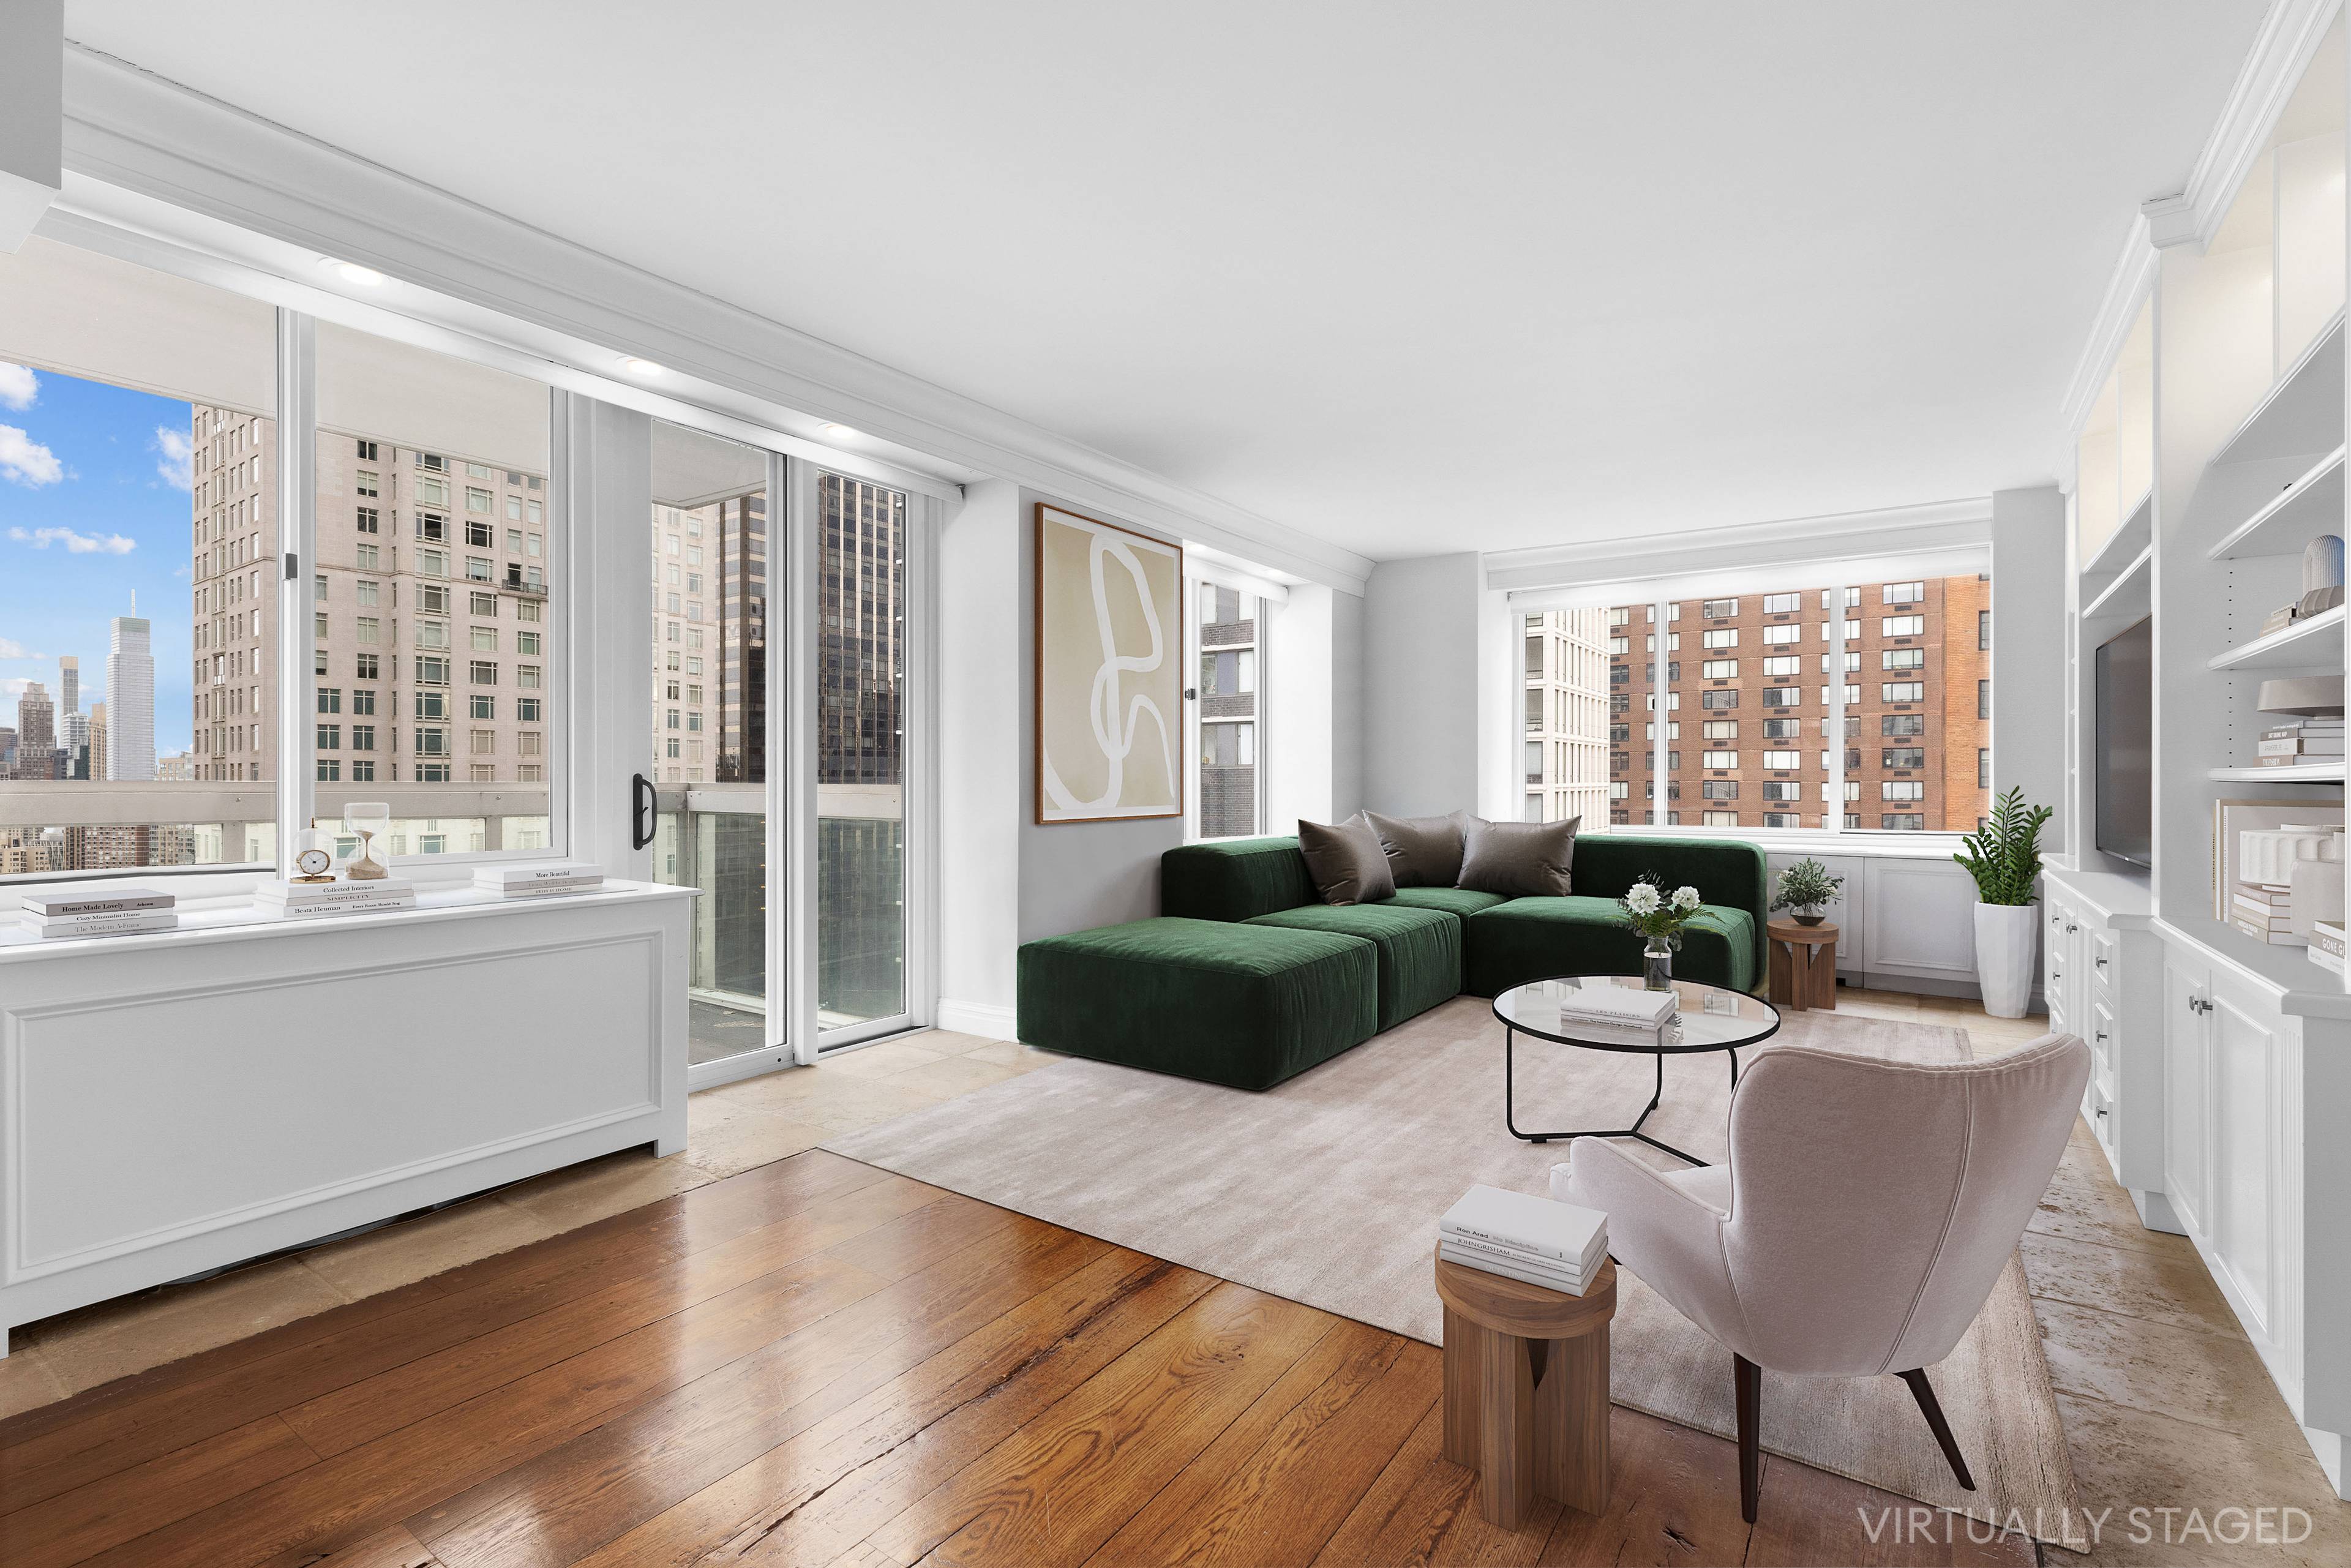 Experience the height of urban sophistication at Lincoln Center with this exceptional opportunity for spacious living.